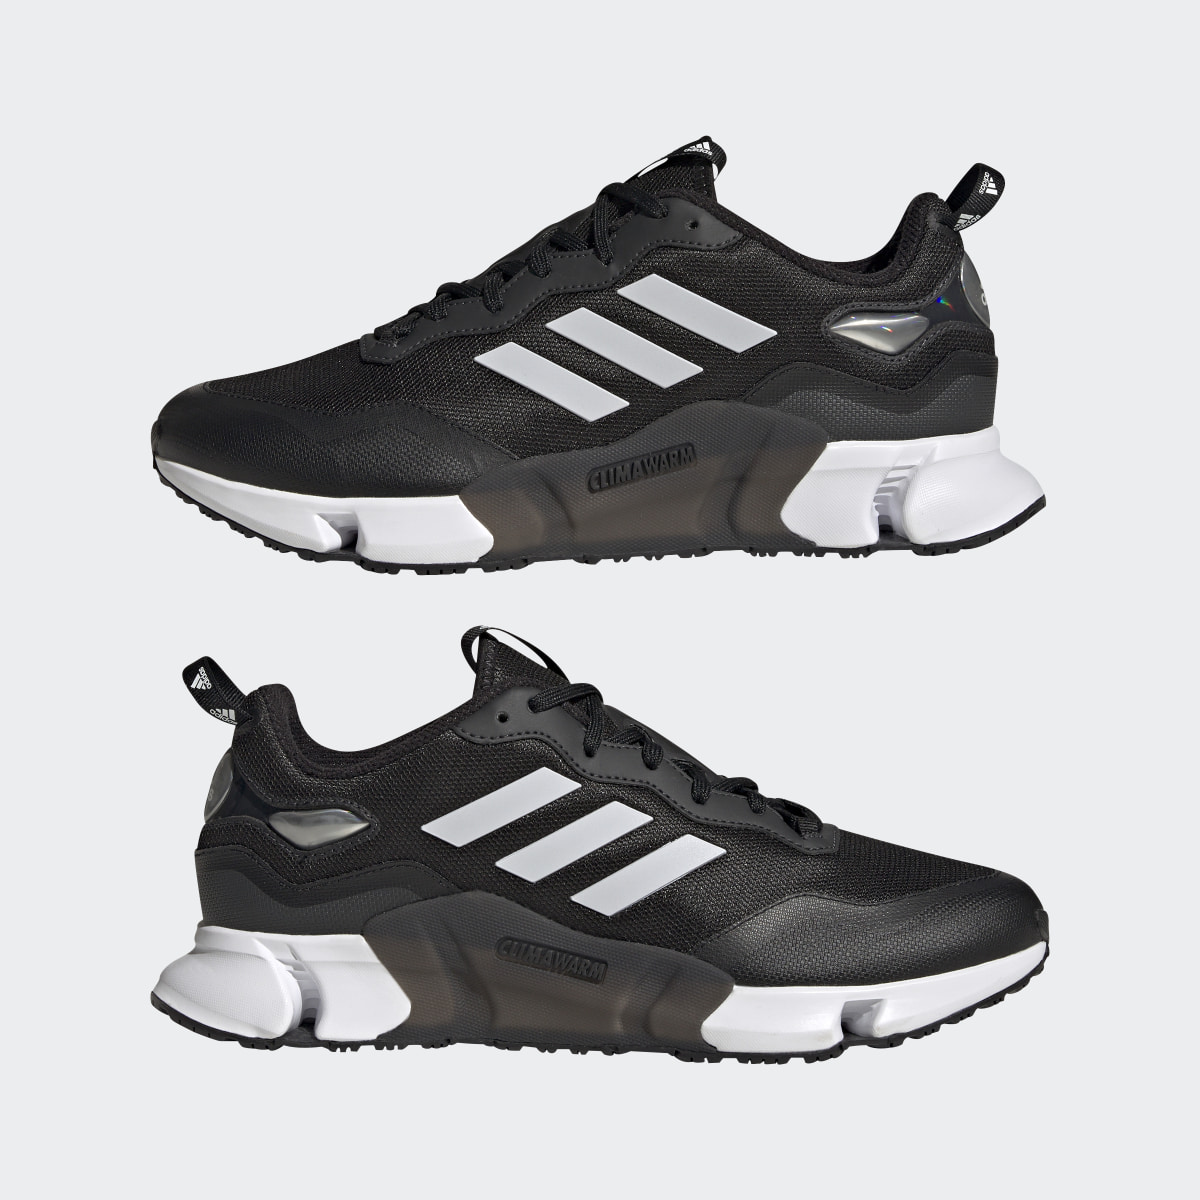 Adidas Chaussure Climawarm. 11